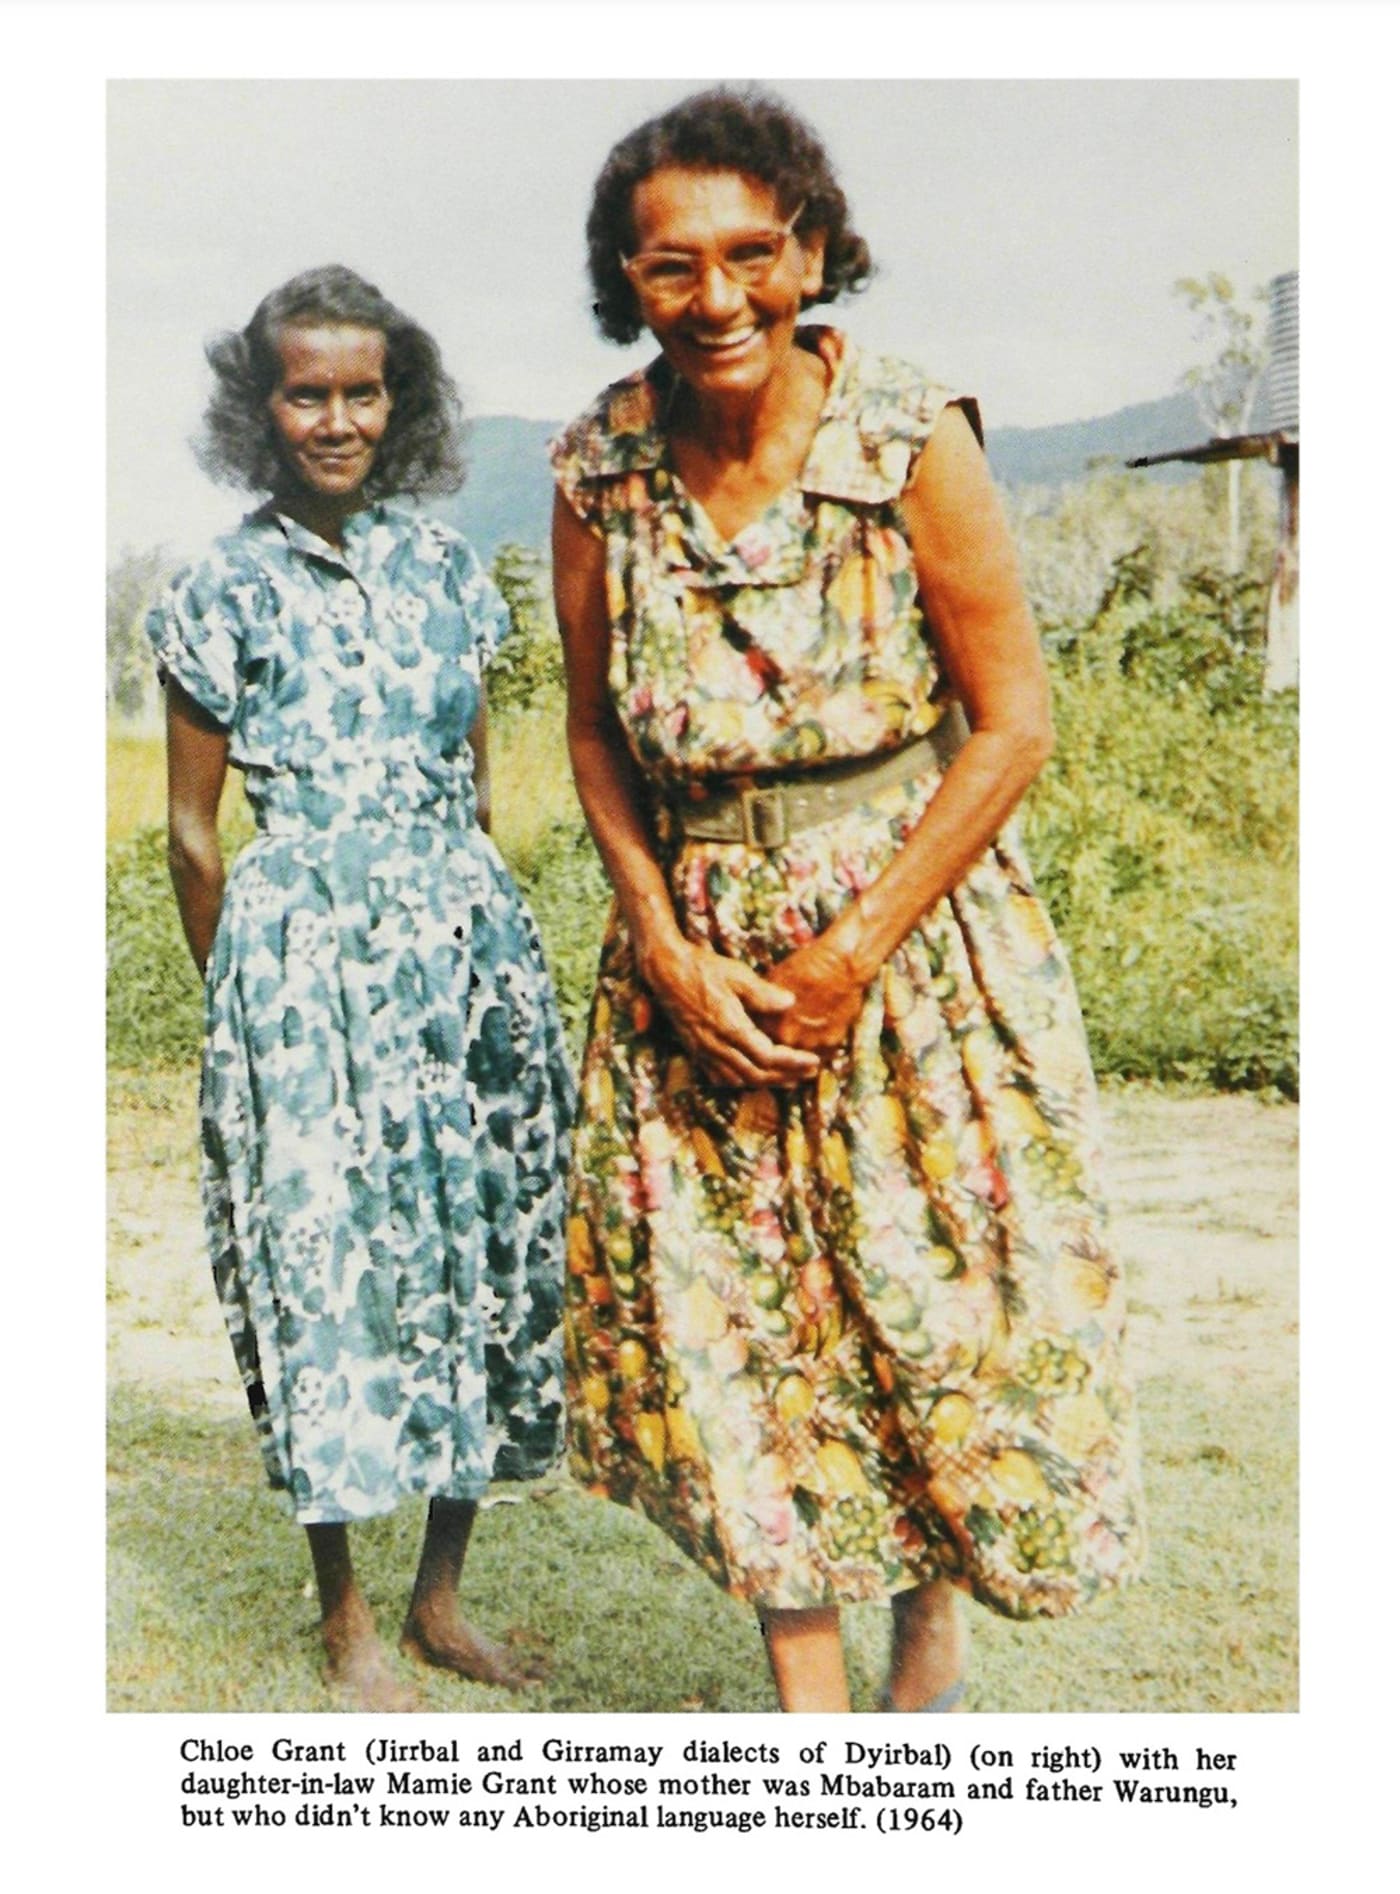 Sonya’s grandmother Chloe Grant as featured in the book Searching for Aboriginal Languages (shared with permission from Sonya Takau)